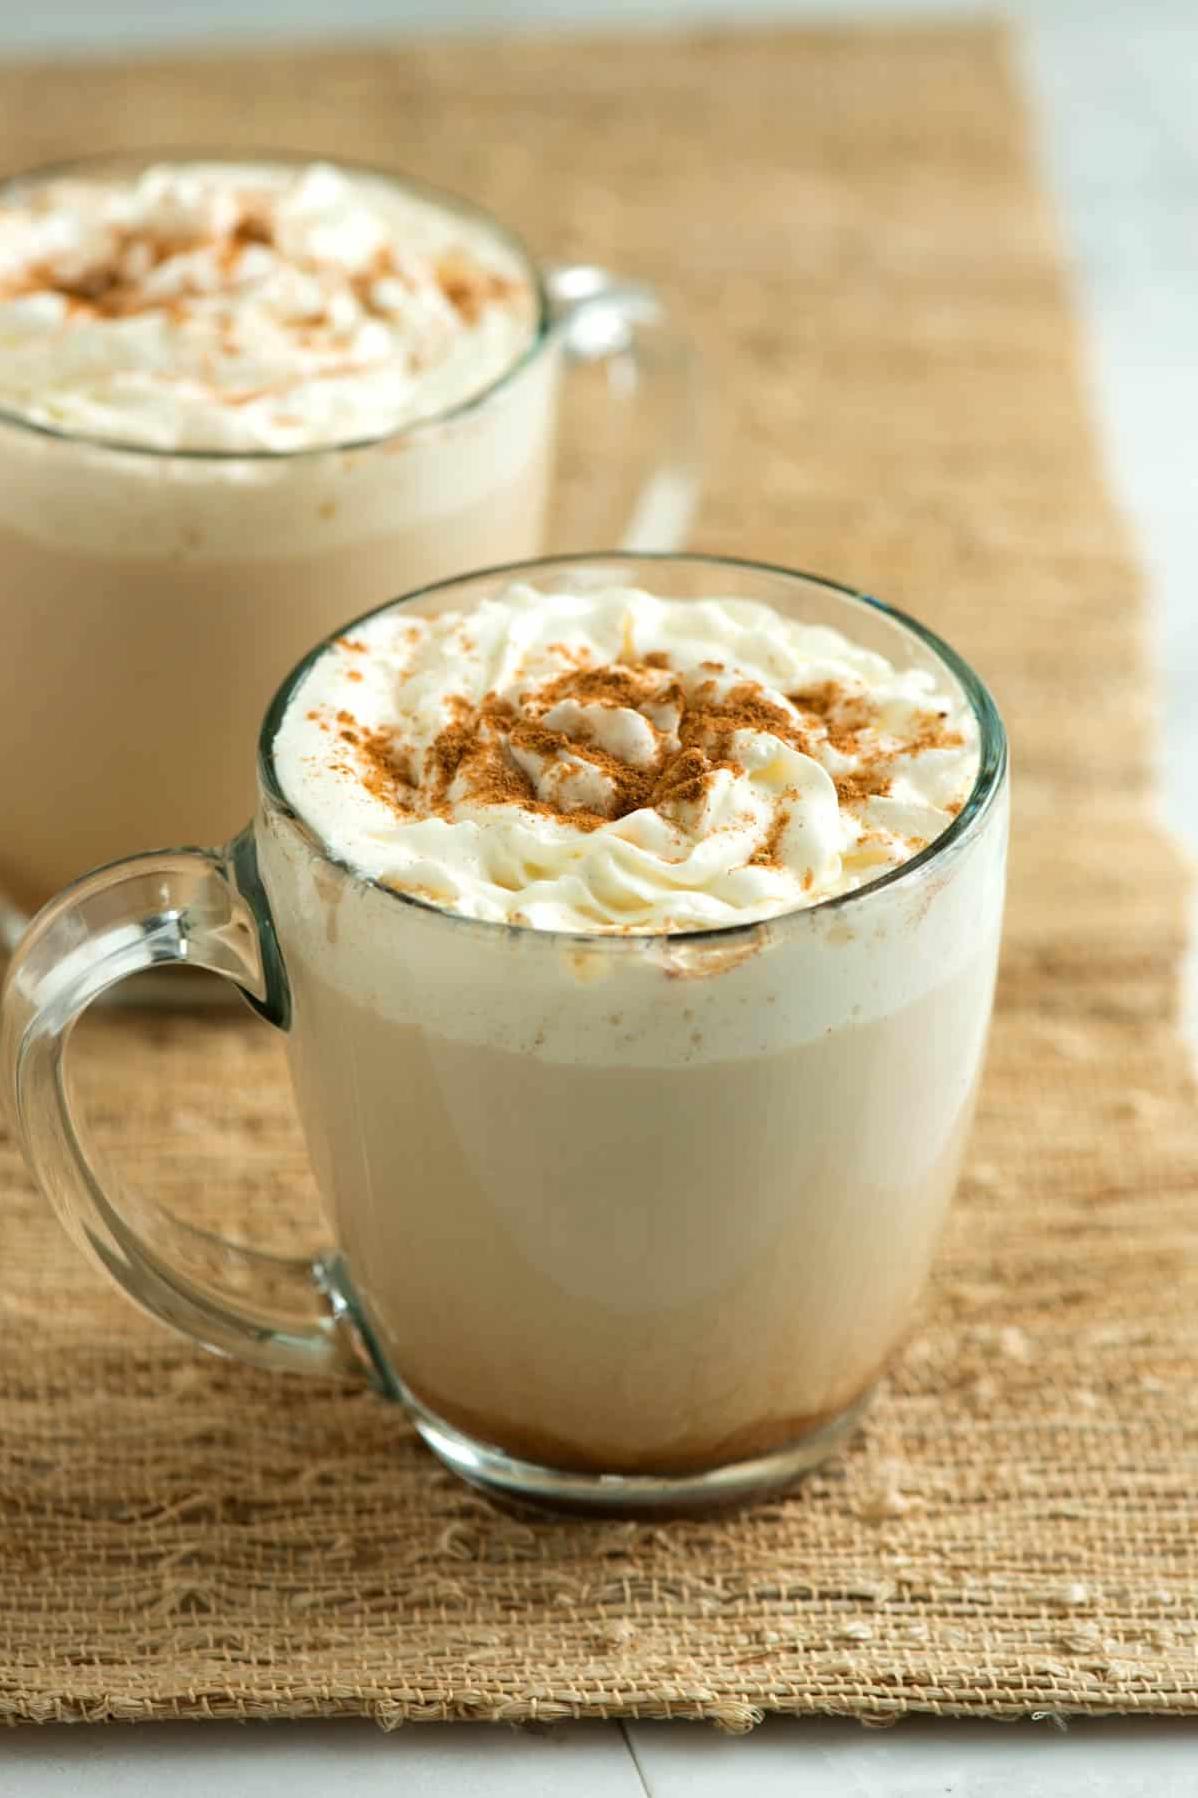  Cozy up and enjoy the flavors of fall with this delicious beverage